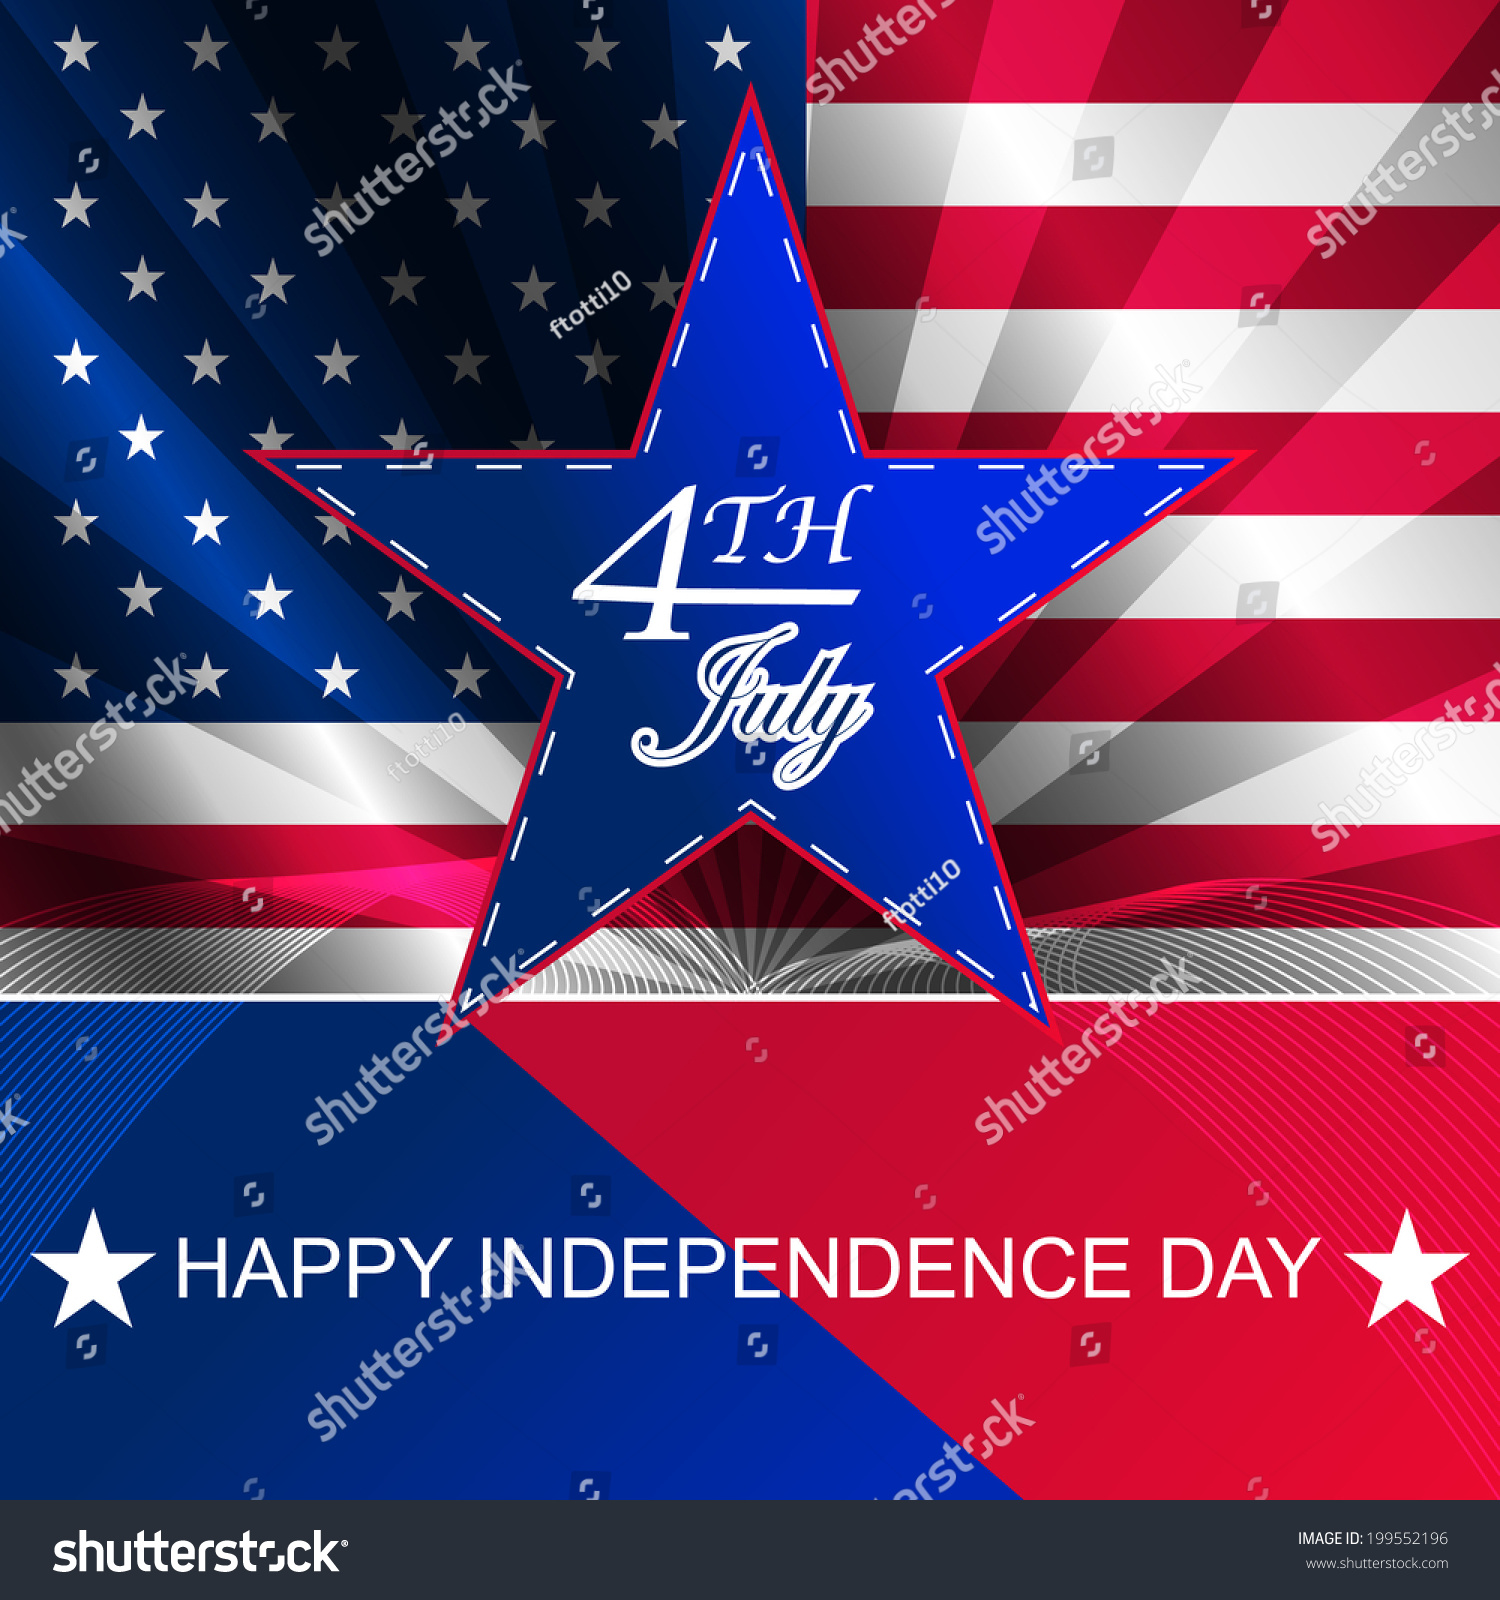 Independence Day, Vector Background/Design For Poster, Print Or